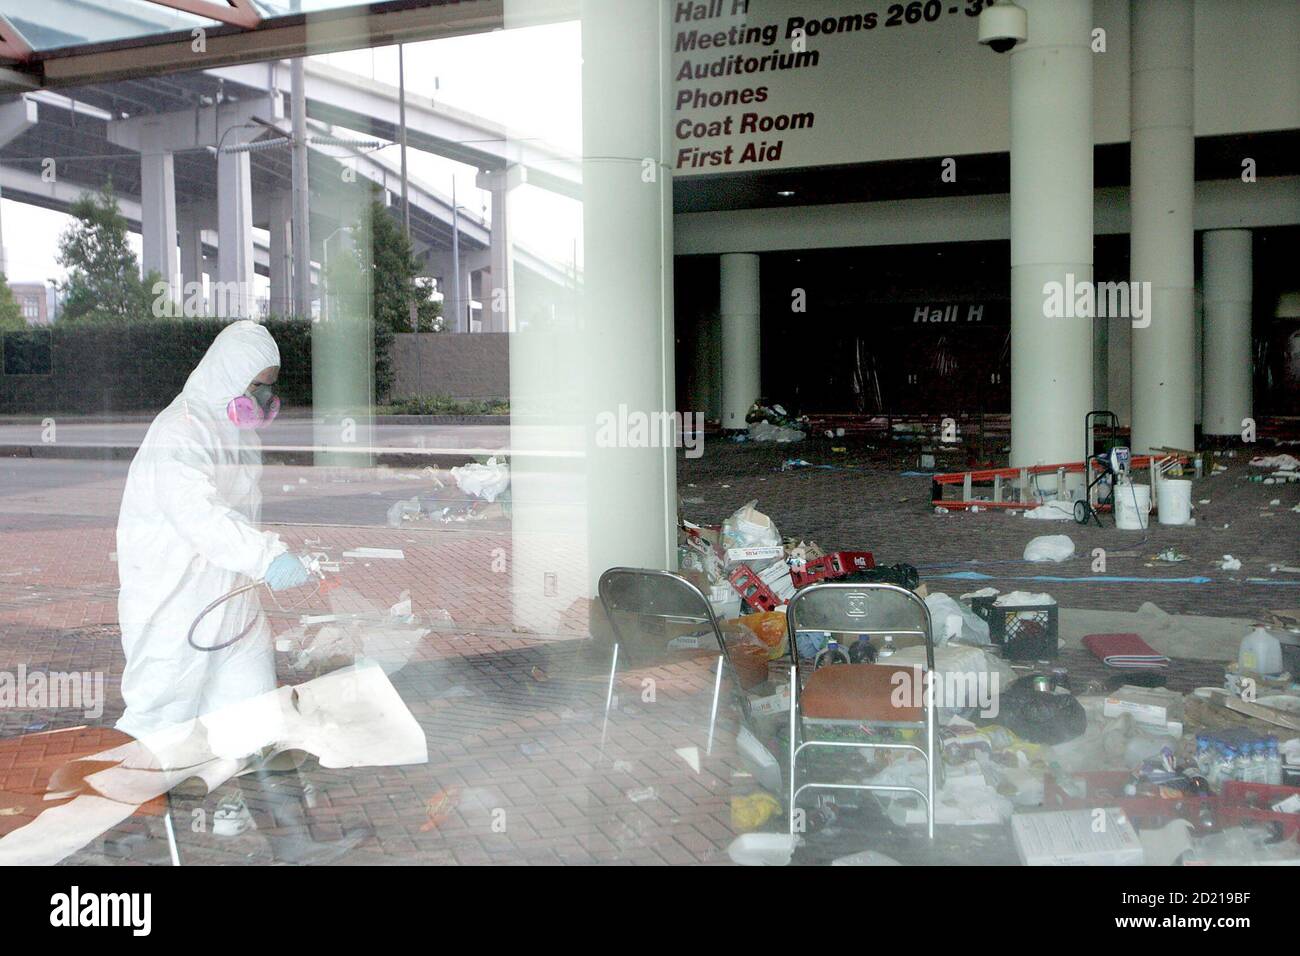 A worker wearing a protective suit sprays down the inside of the Convention Center where Hurricane Katrina evacuees were originally housed, in New Orleans, Louisiana, September 18, 2005. Federal and local authorities clashed on Sunday over whether New Orleans was ready for residents to return, putting in doubt efforts to quickly resettle the devastated city. REUTERS/Jessica Rinaldi  JR/PN Stock Photo